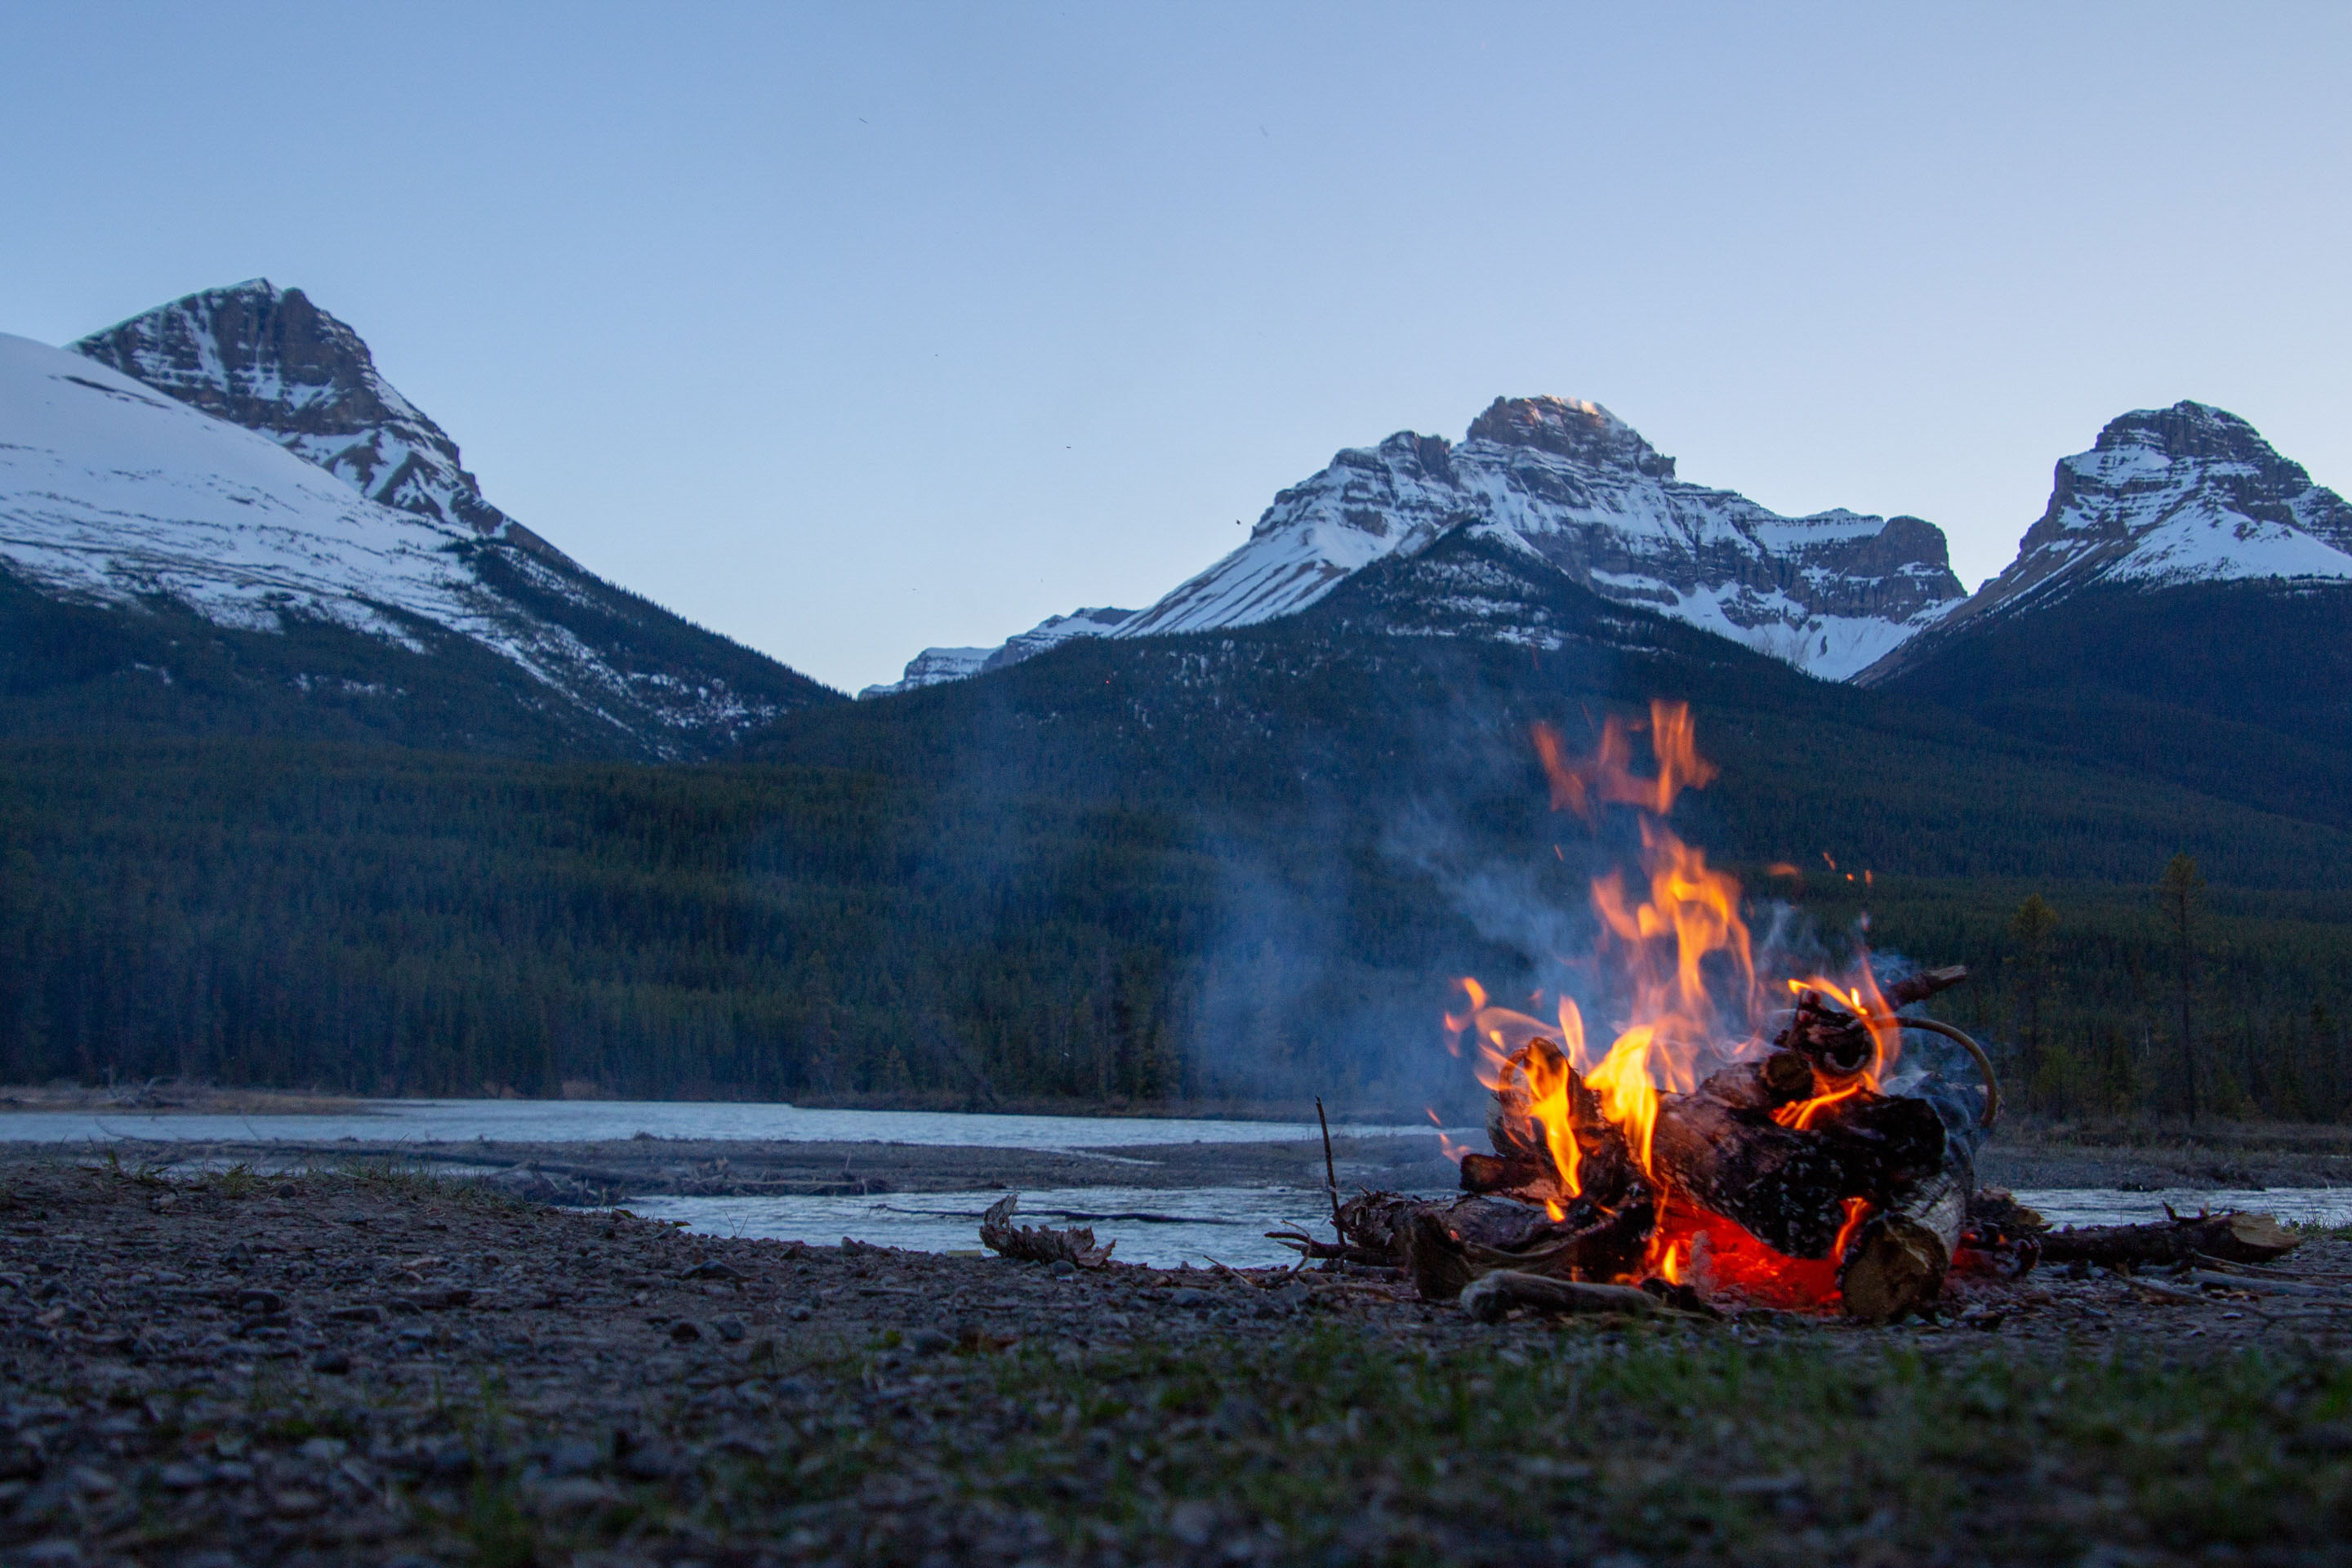 Summer time fire-it in front of mountains. Unsplash - Courtnie Tosana